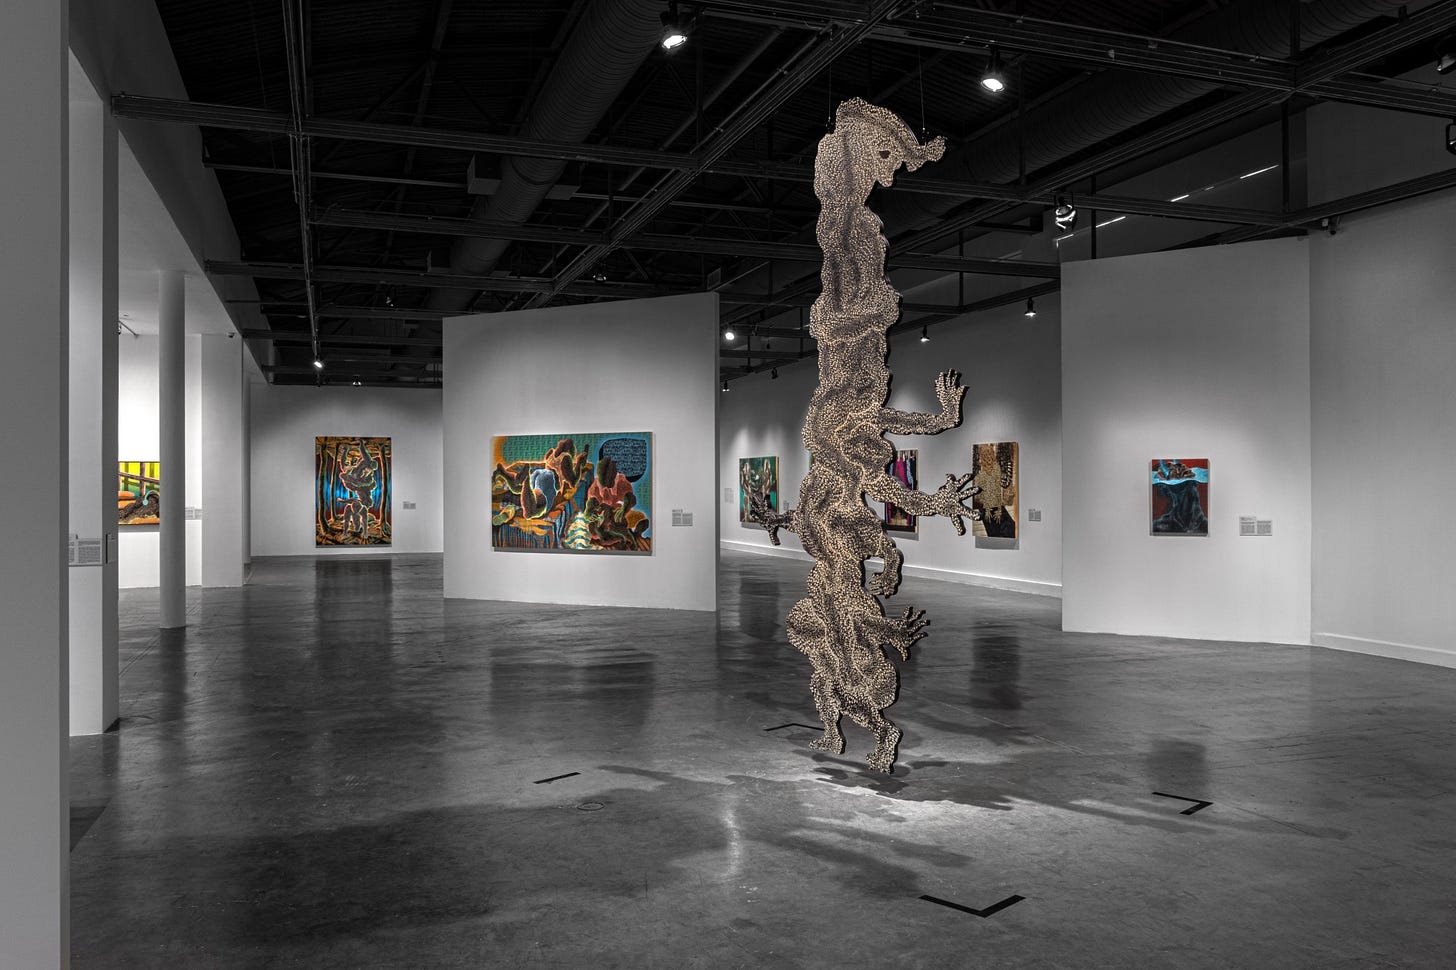 Installation view of Didier William’s 2022 exhibition “Nou Kite Tout Sa Dèyè” (“We’ve Left That All Behind”) at MOCA North Miami.